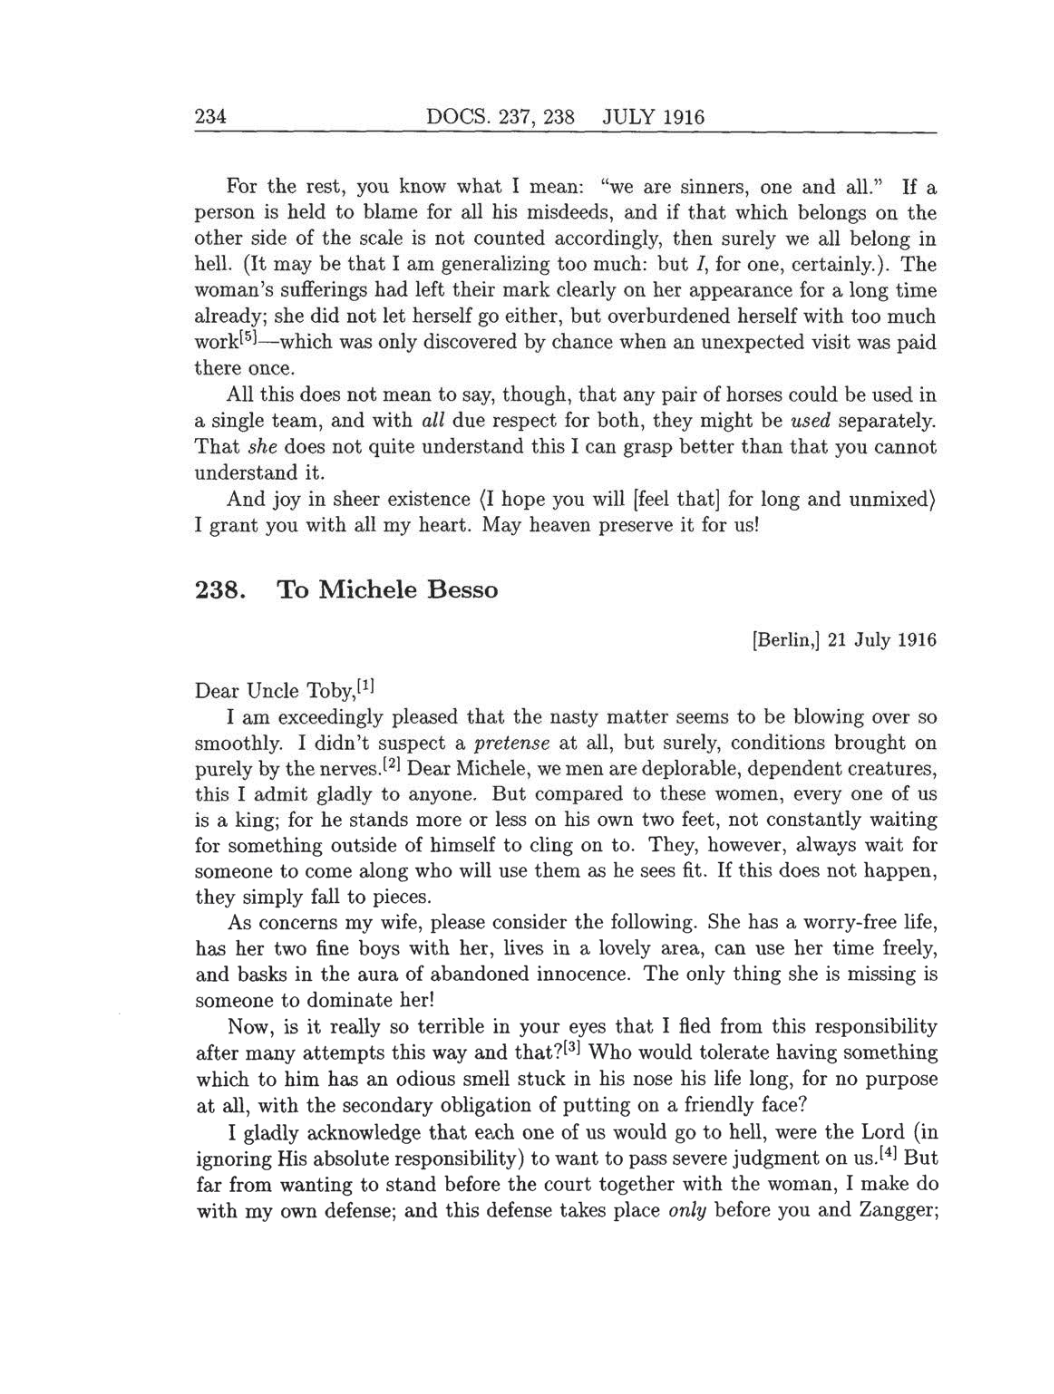 Volume 8: The Berlin Years: Correspondence, 1914-1918 (English translation supplement) page 234